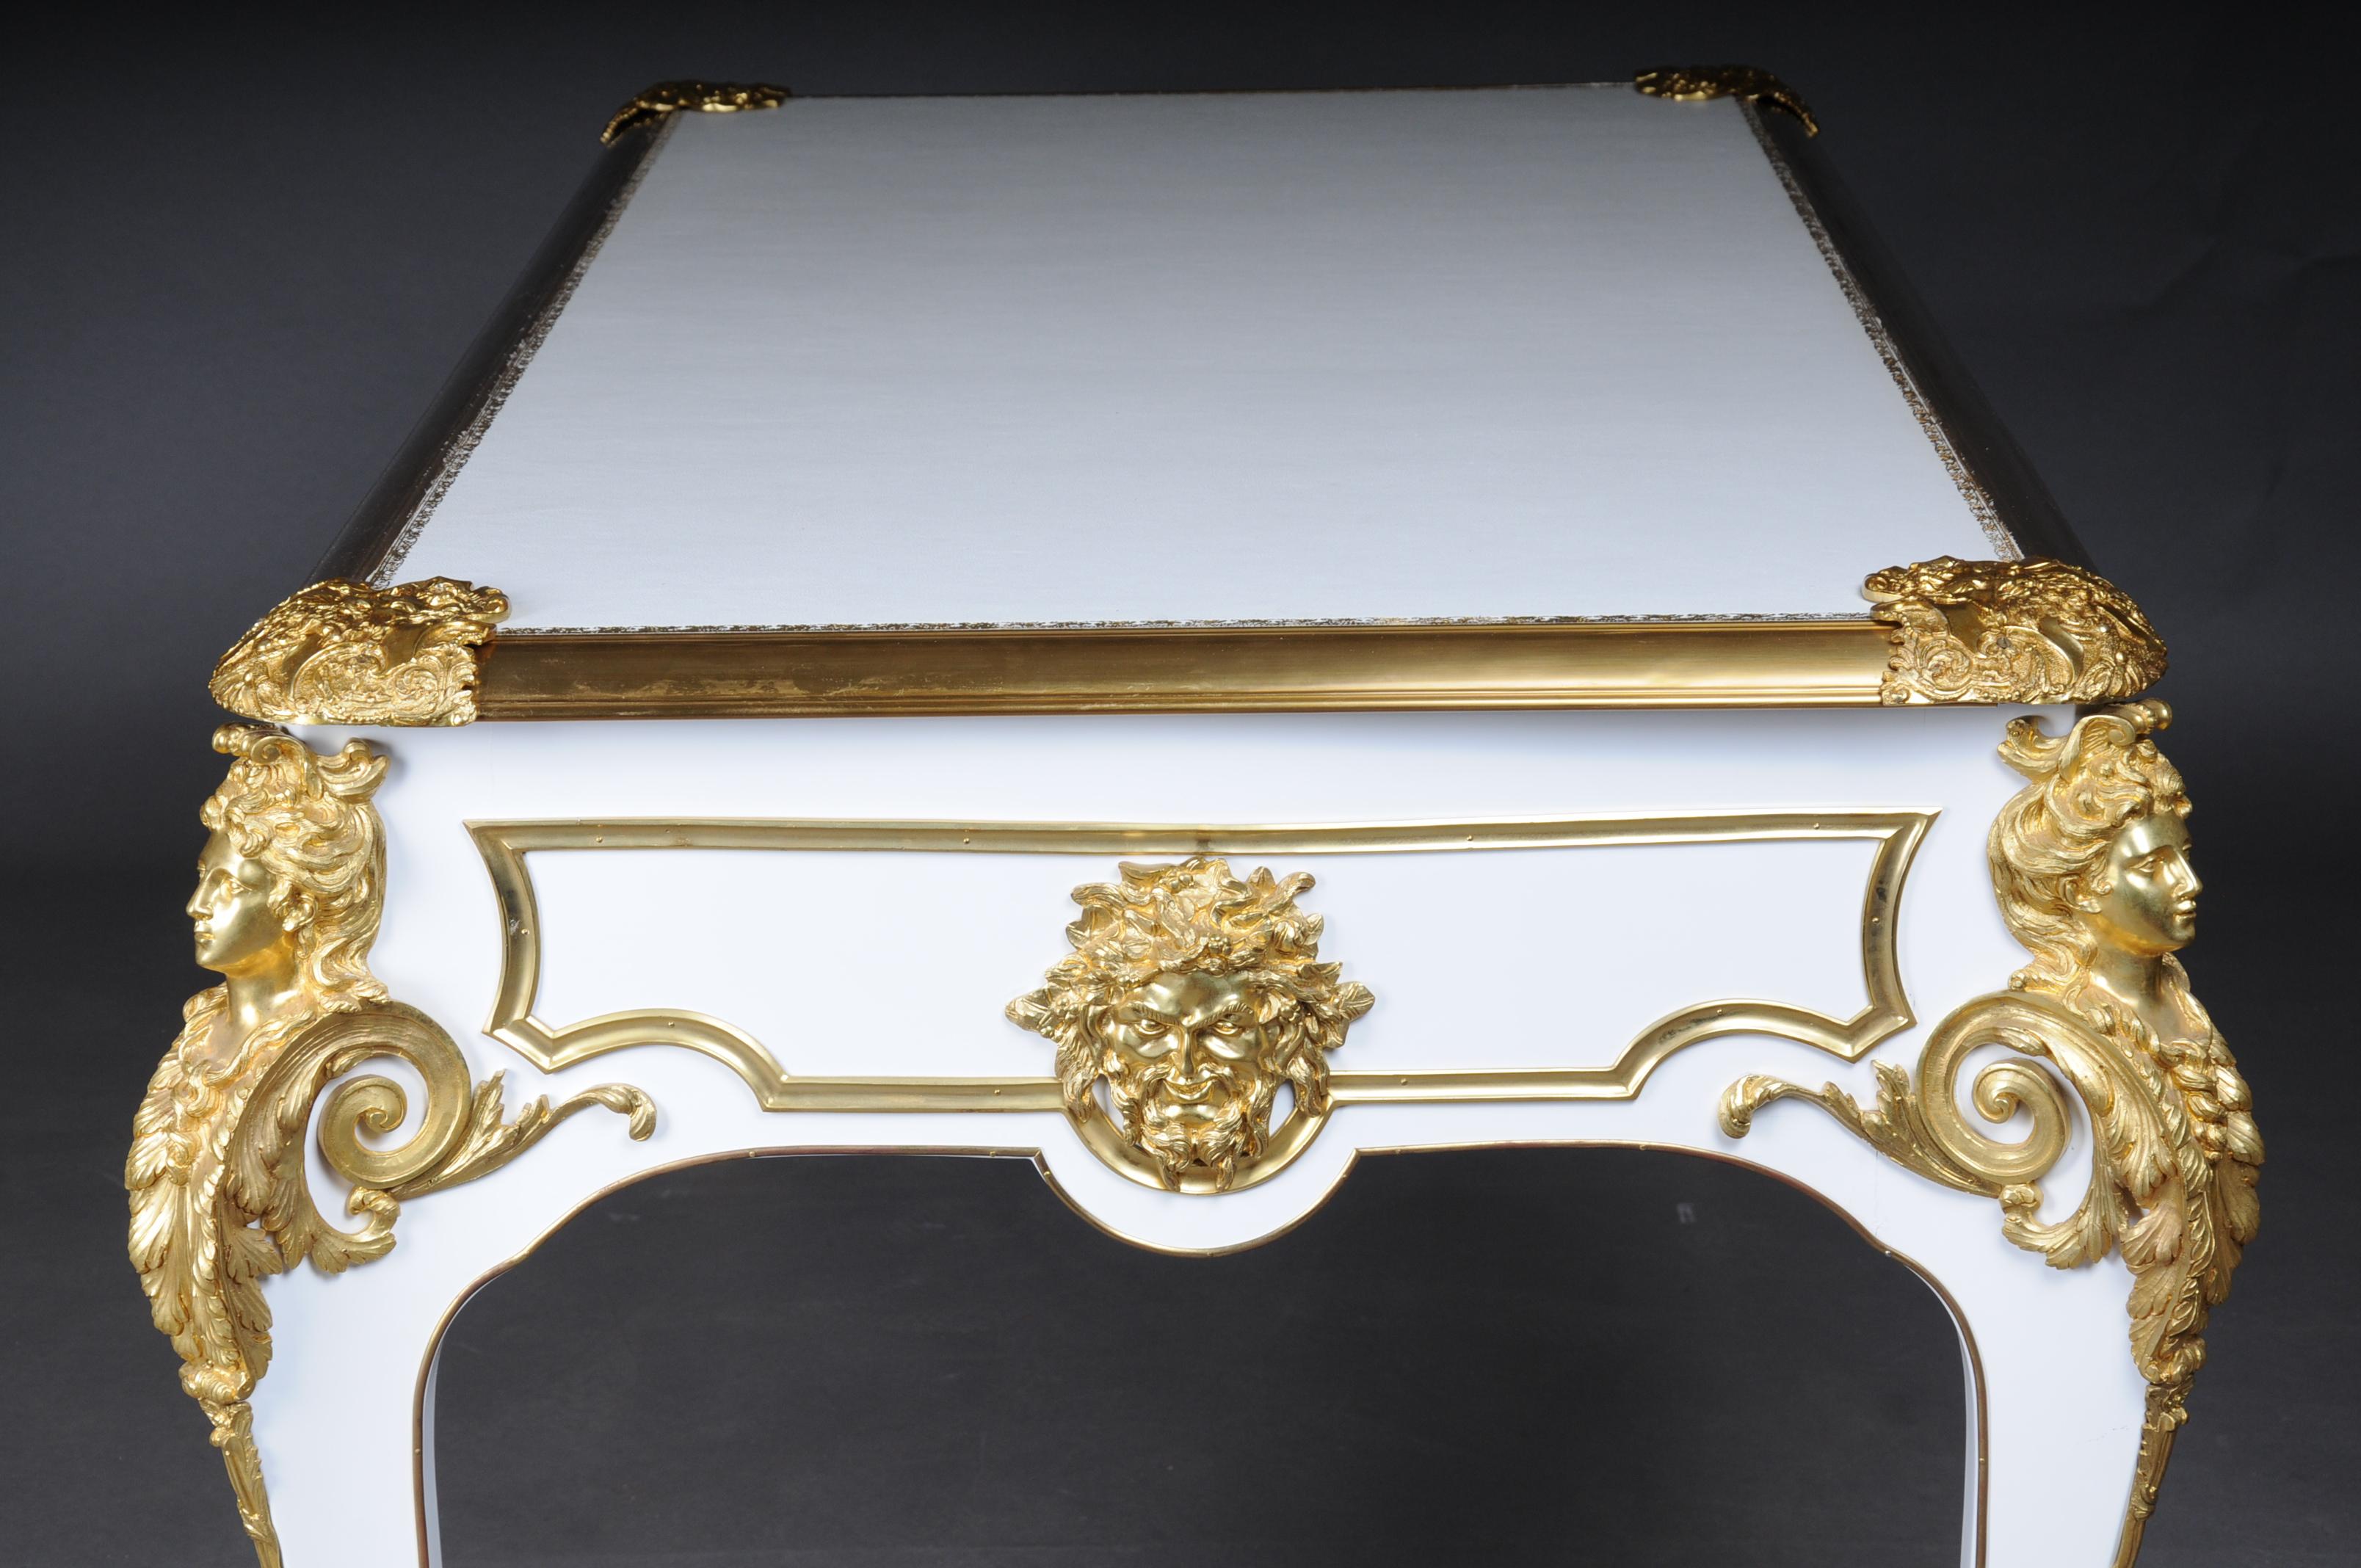 20th Century Bureau Plat/Desk high gloss white with gold after C. Boulle For Sale 7